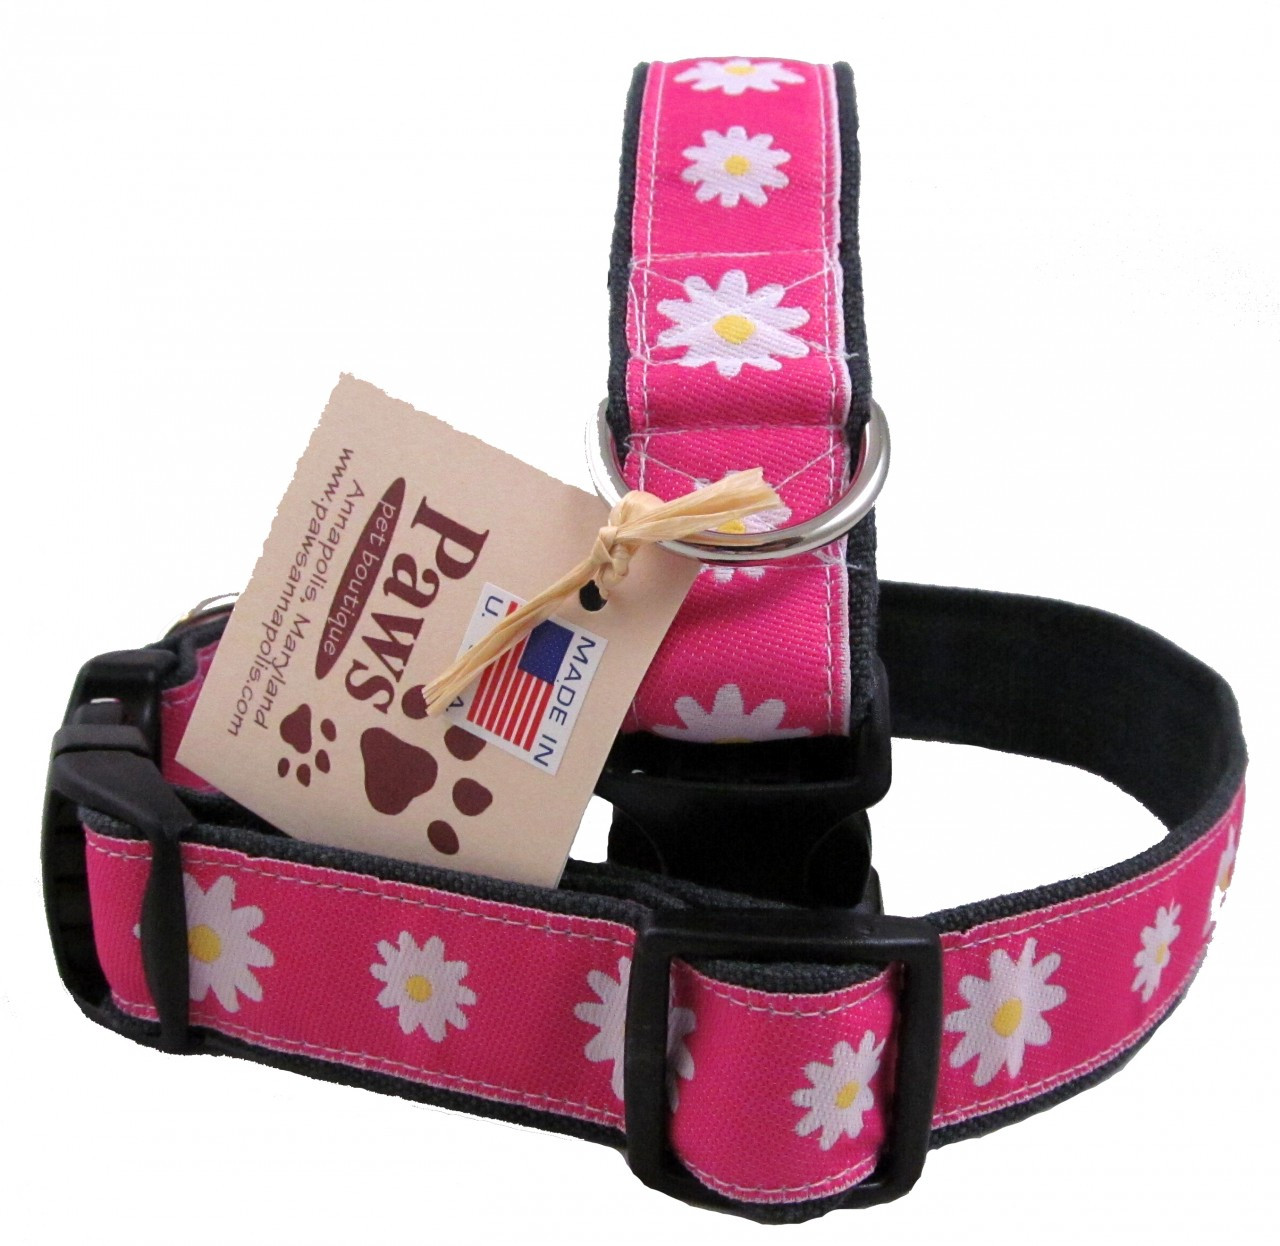 Light Pink Floral Dog Collar Adjustable Dog Collar with Buckle Dog accessories Girly Dog Collar Daisies Flowers Cute Dog Collar